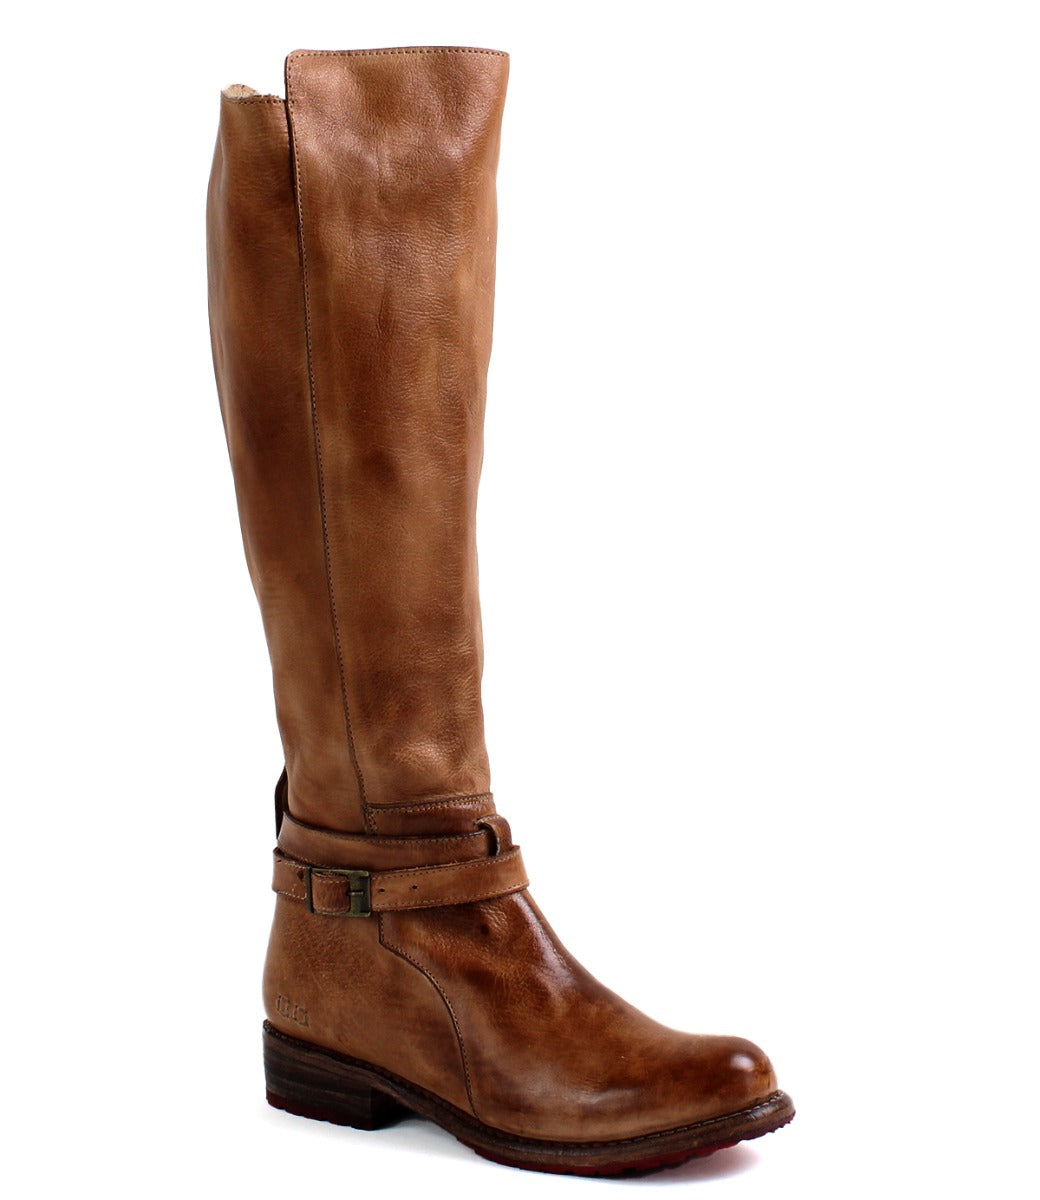 A women's Bristol Wide Calf leather riding boot with buckles by Bed Stu.